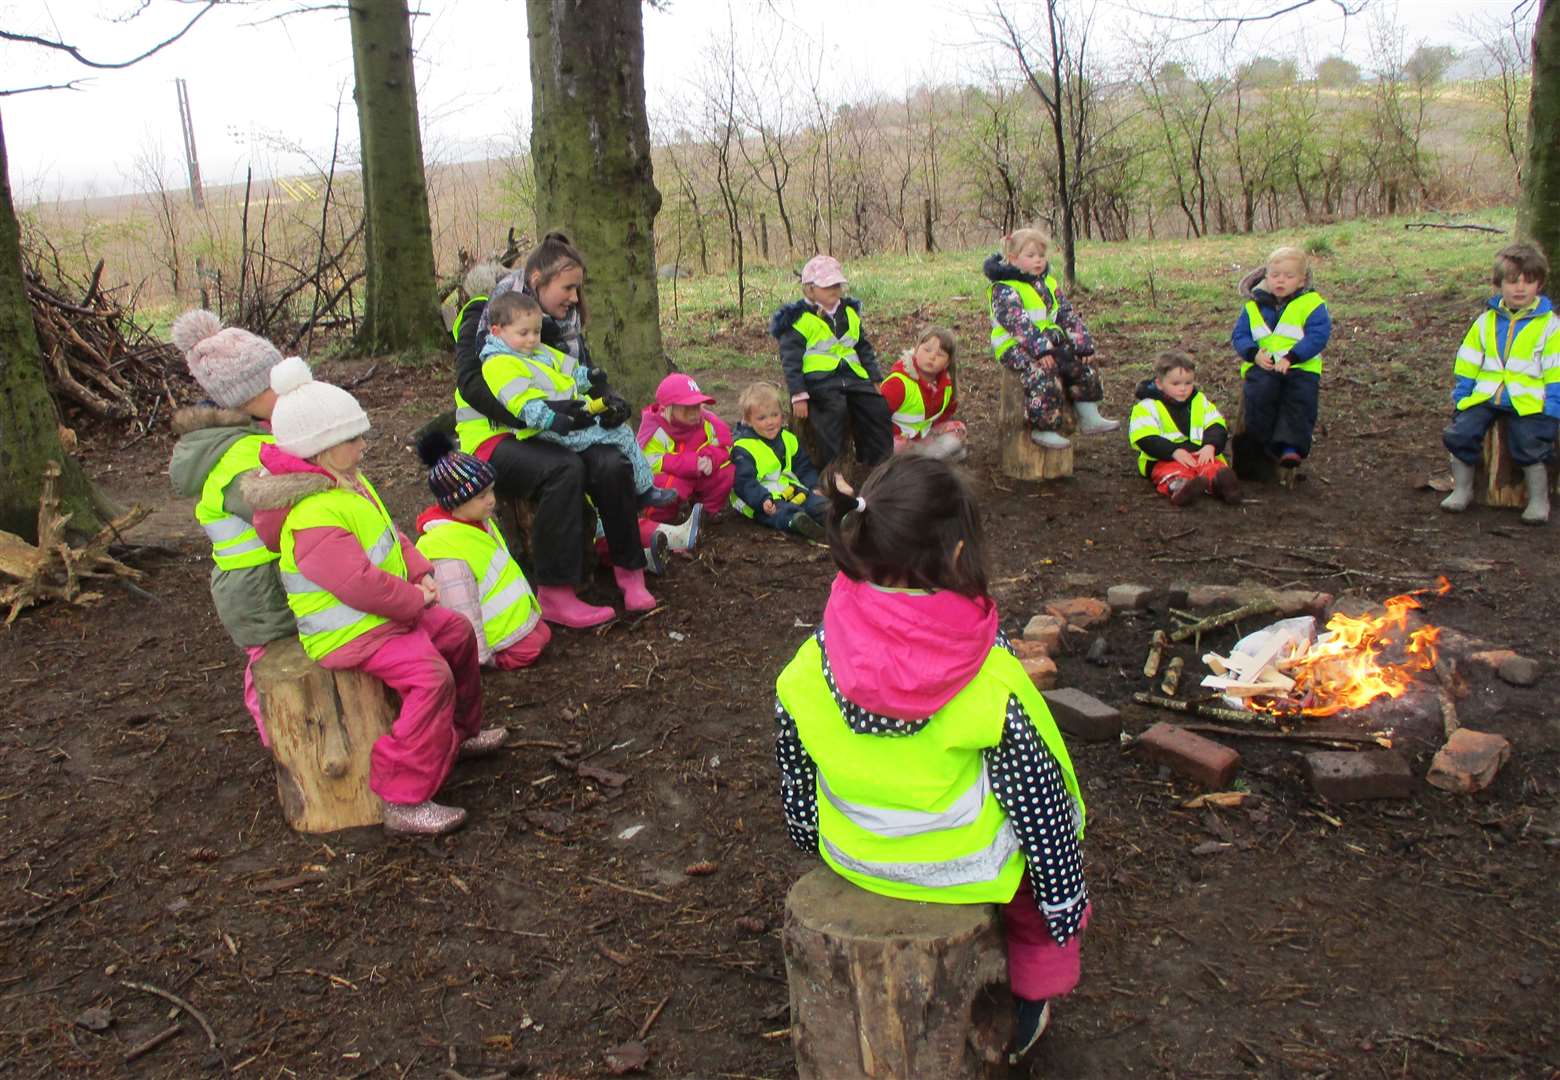 Children from Keith Play Centre enjoy a campfire at the wooded area, before the vandalism took place.